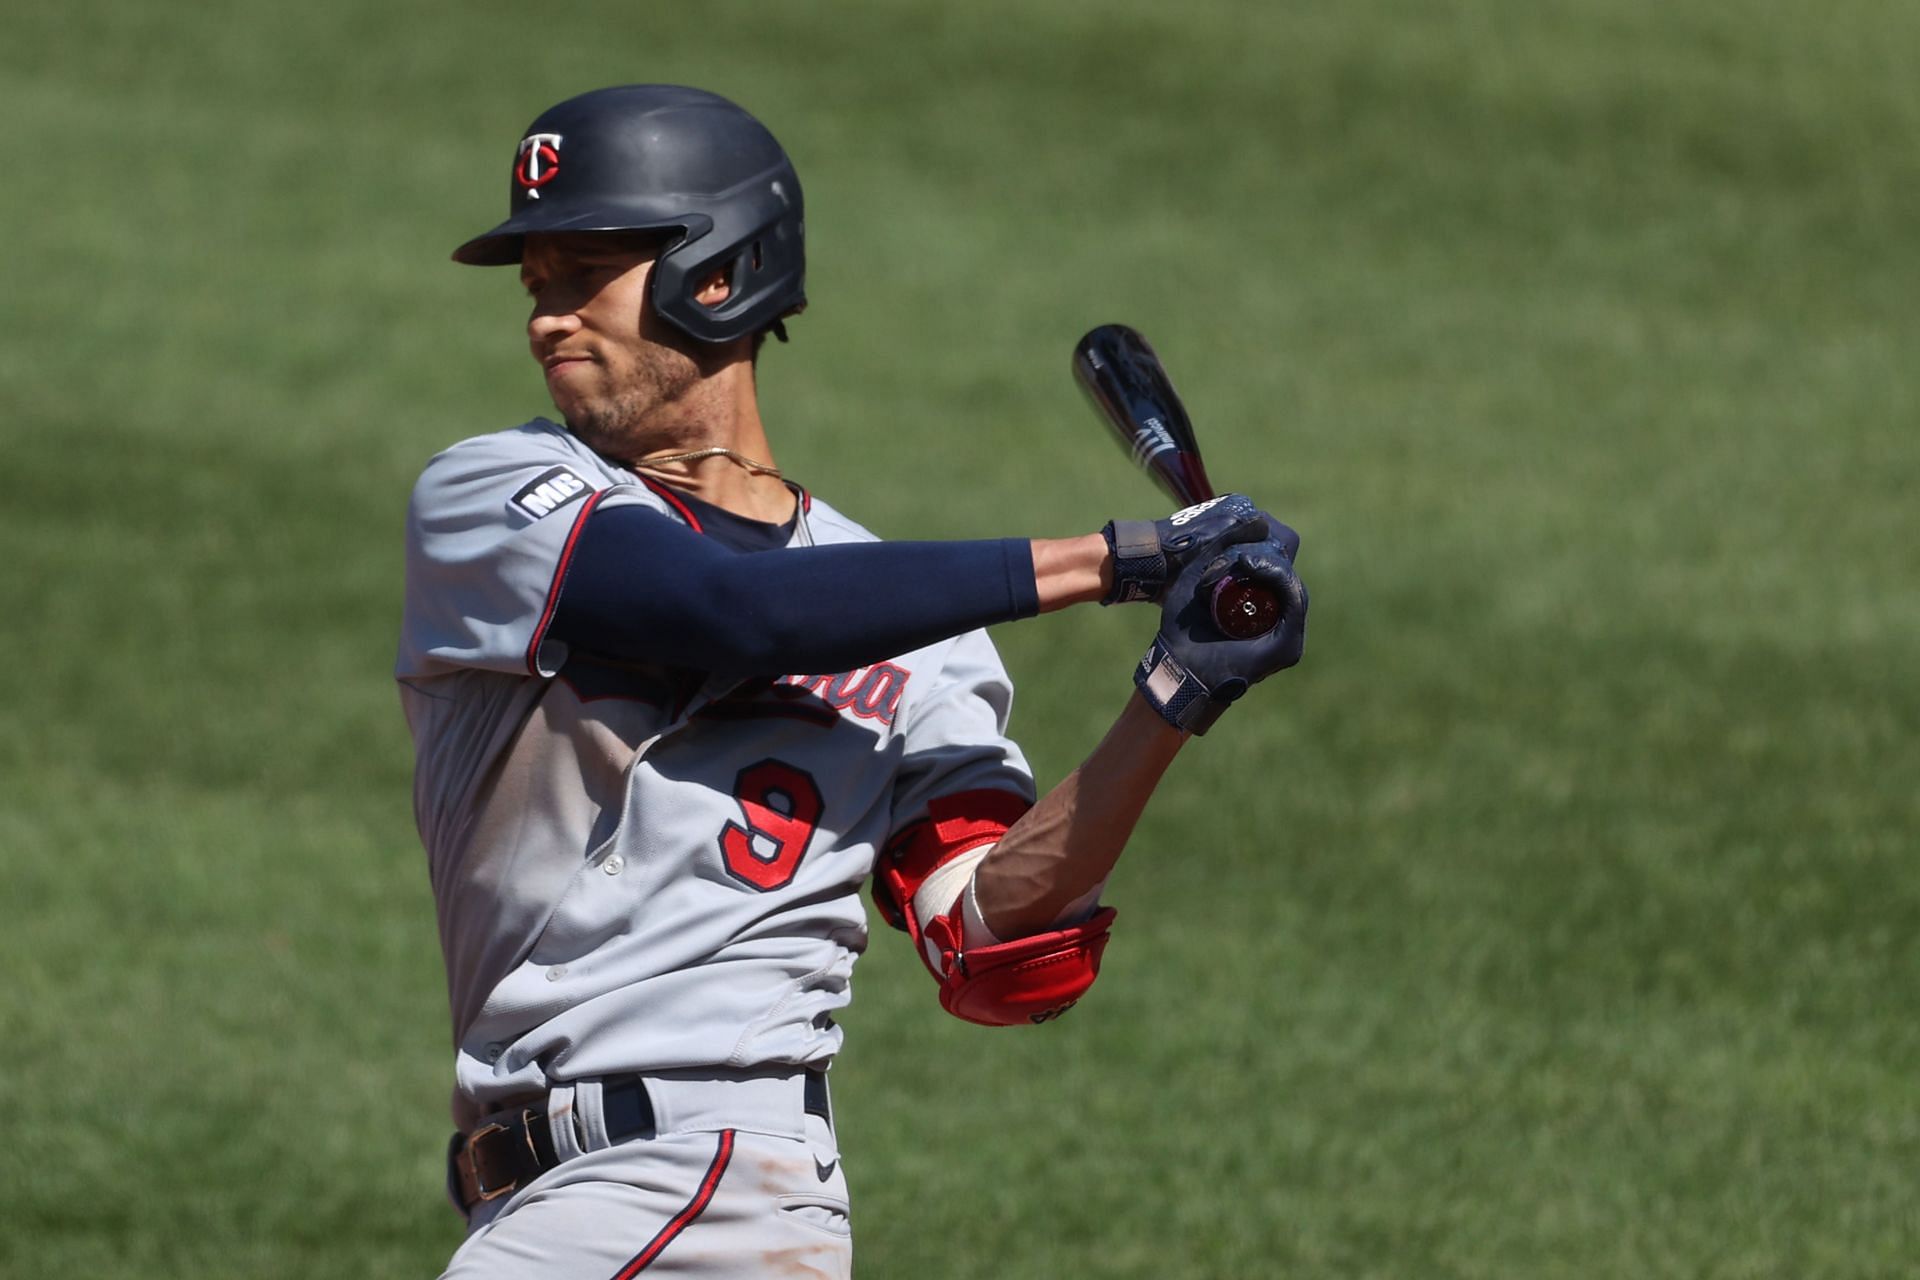 Andrelton Simmons takes a warmup swing during a Minnesota Twins v Baltimore Orioles game